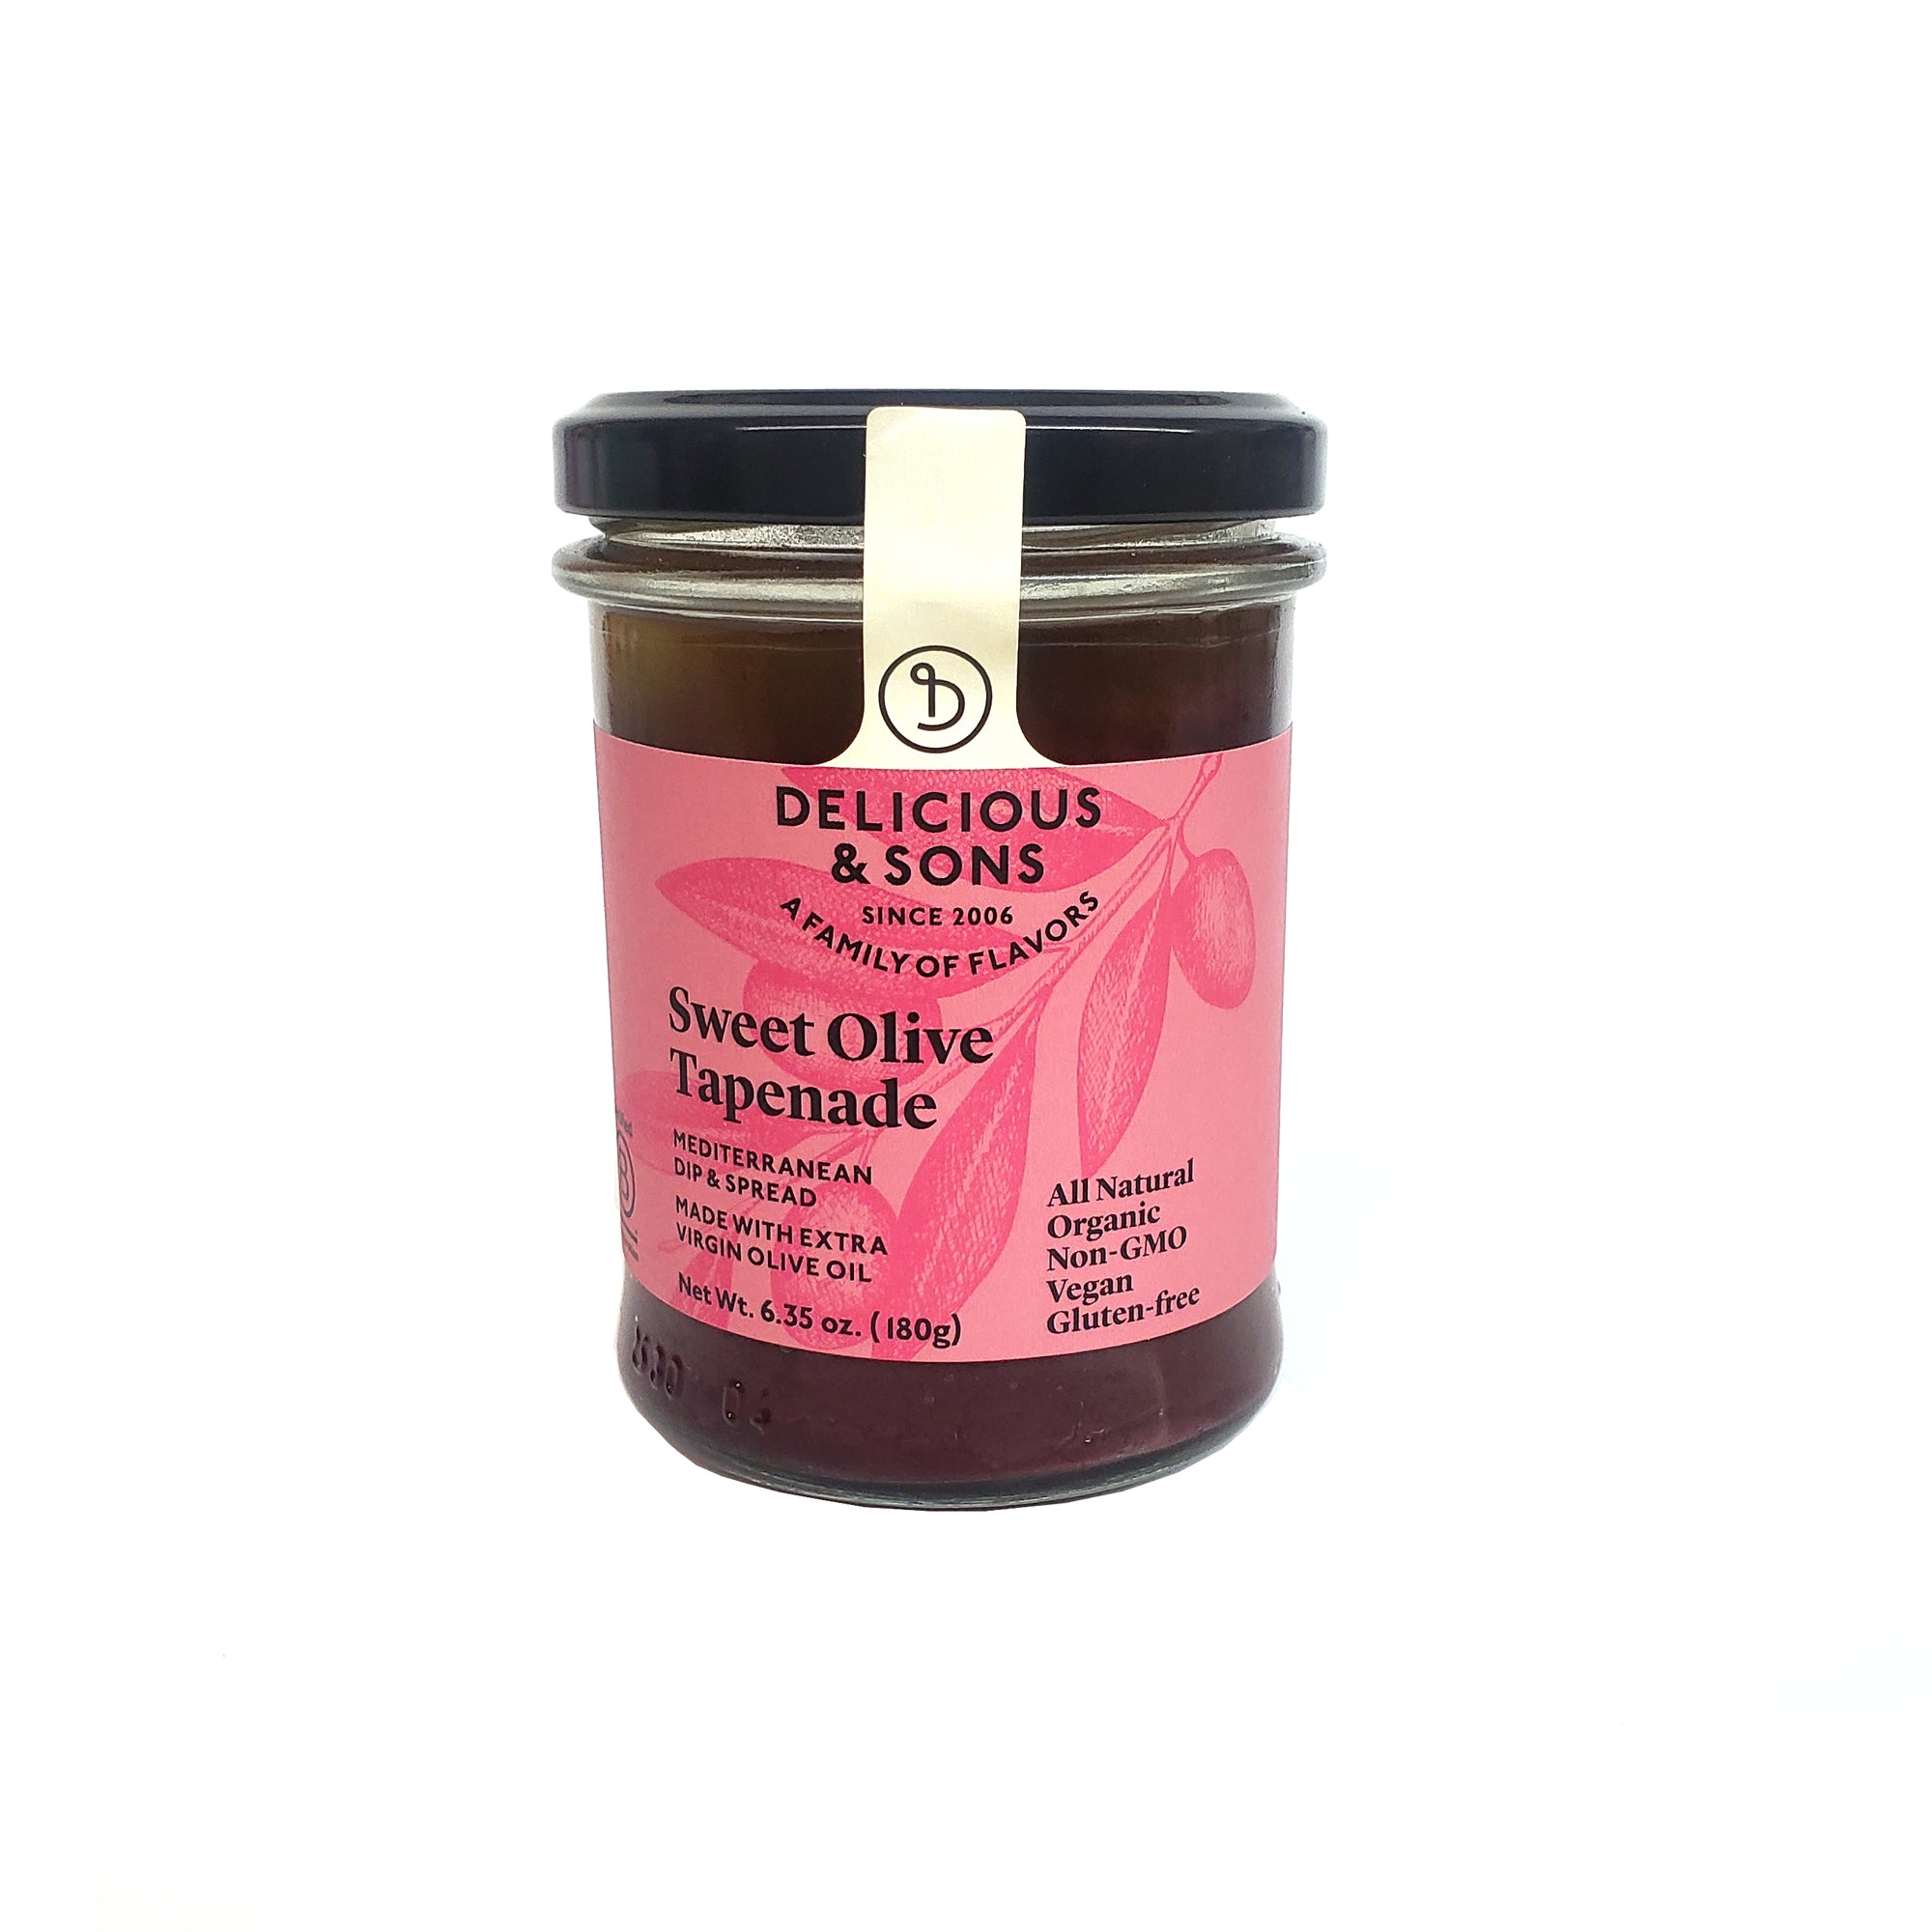 Delicious and Sons Sweet Black Olive Tapenade 180g